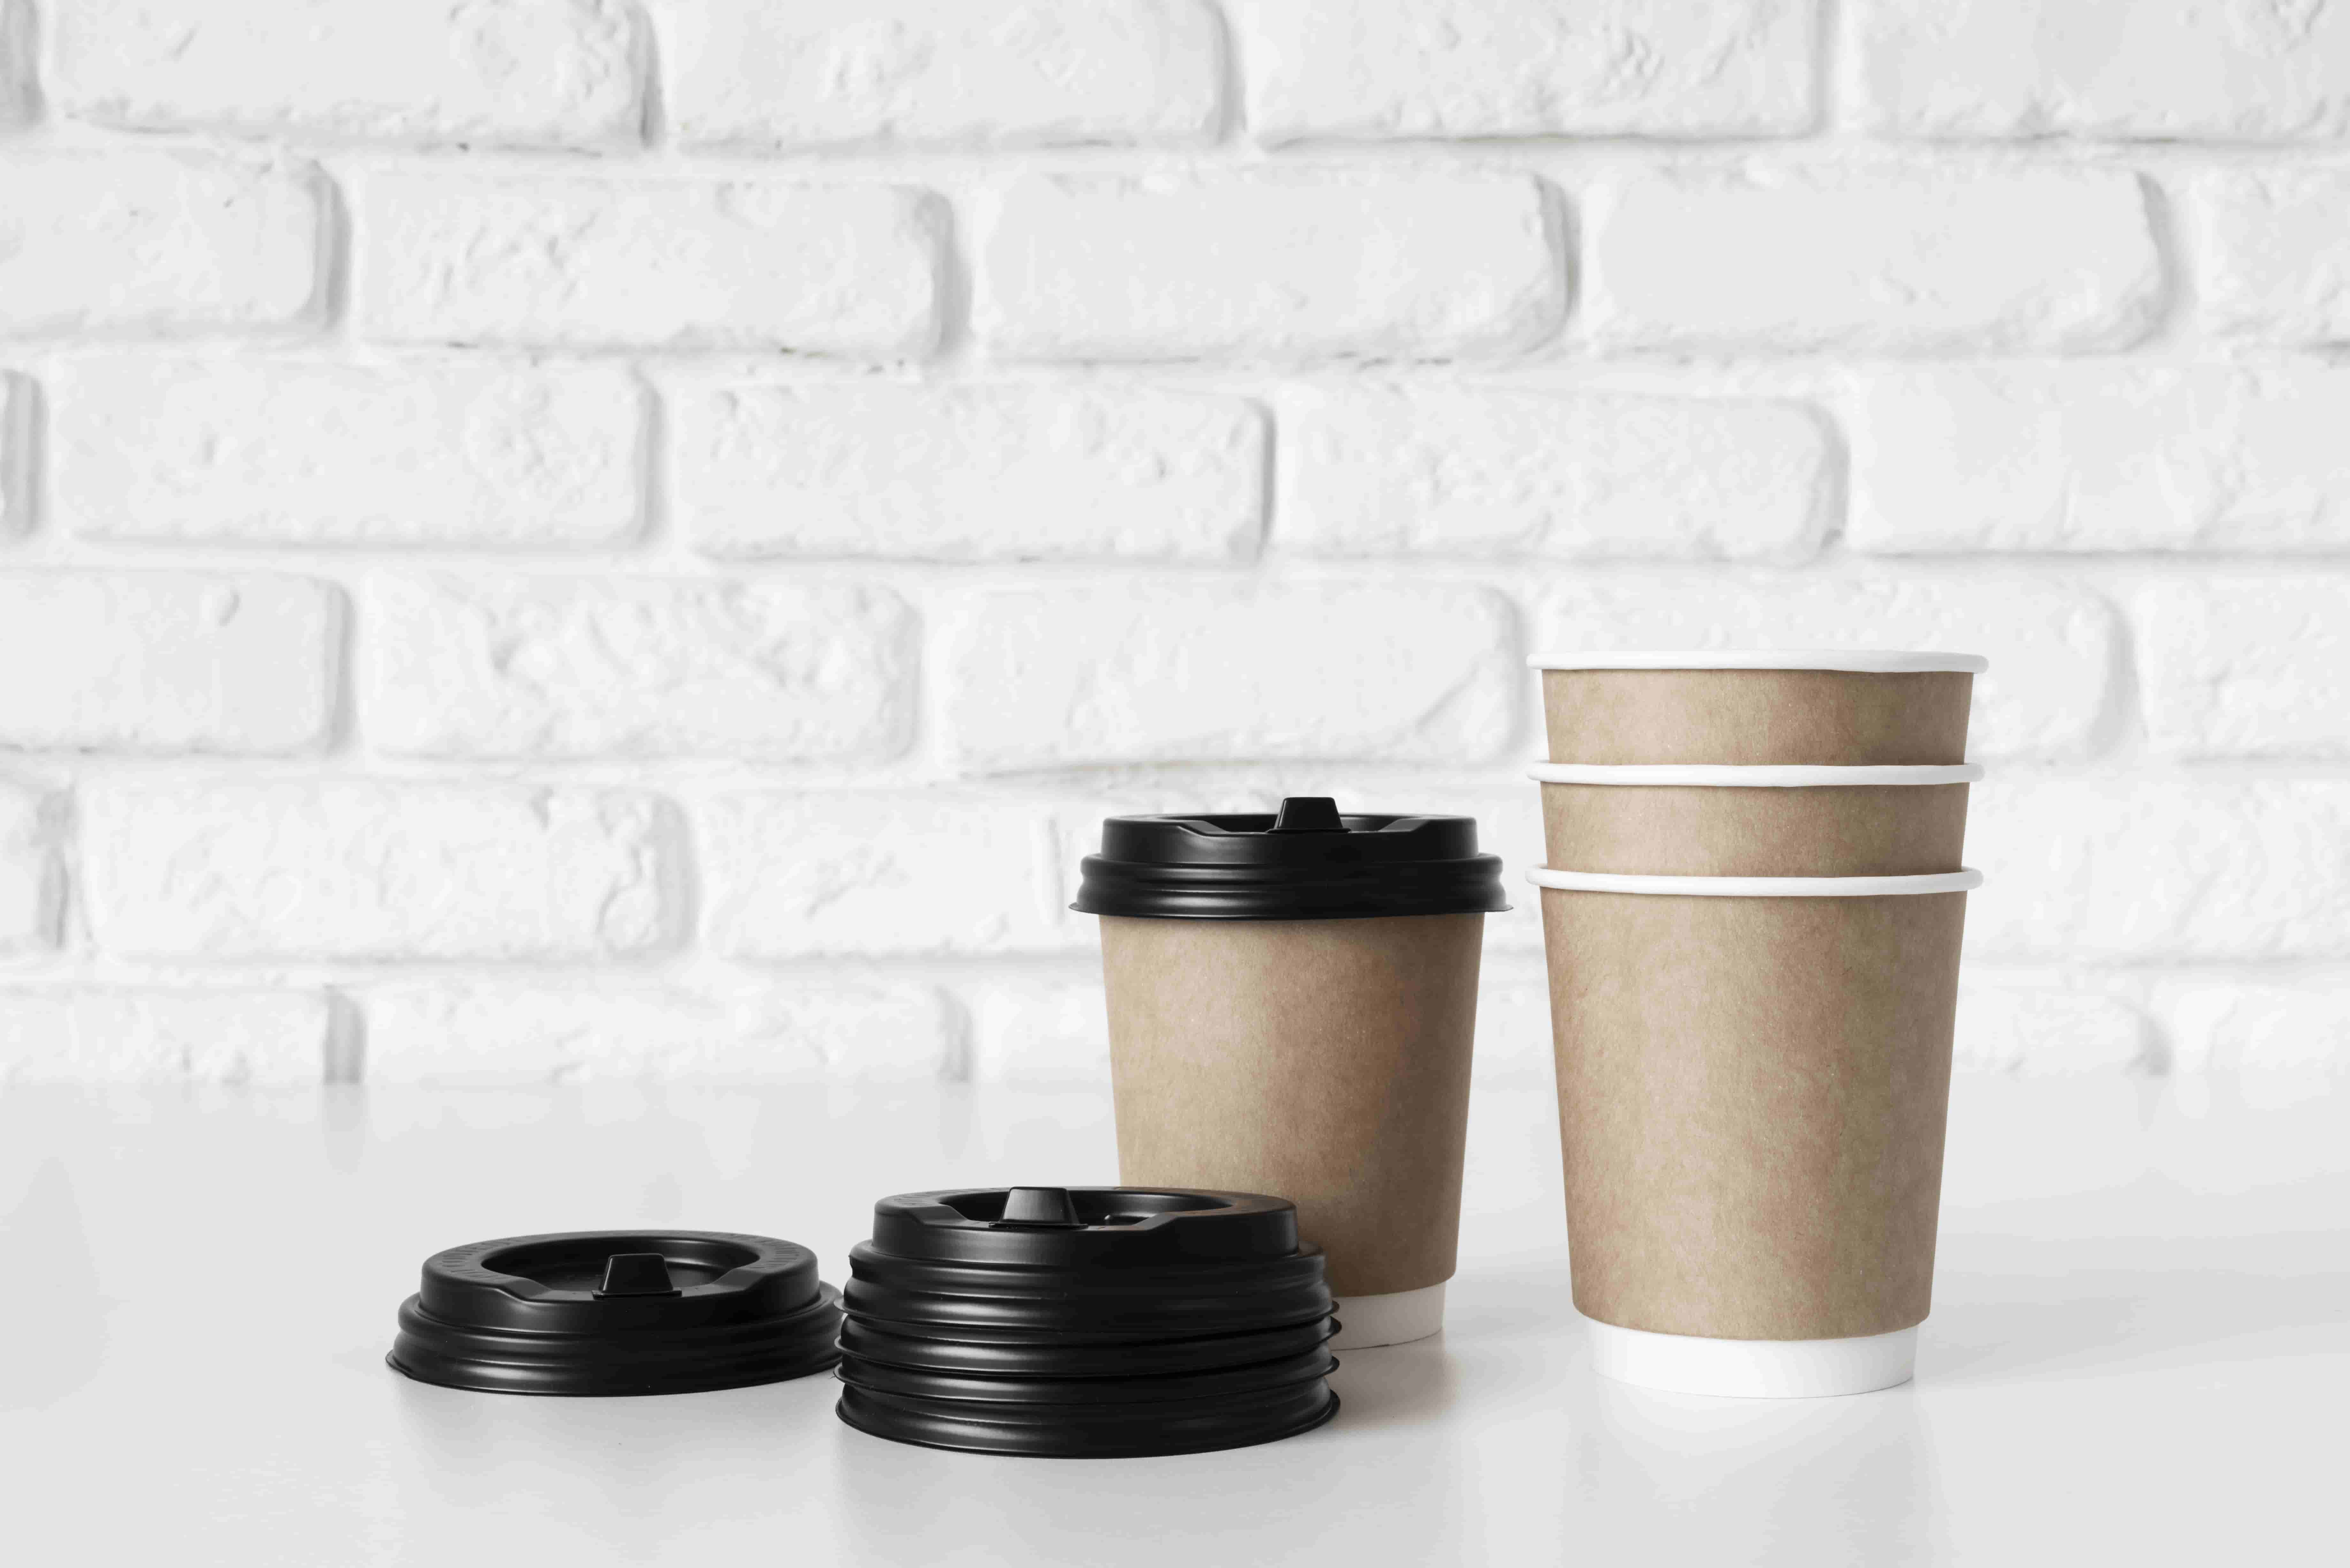 https://www.tuobopackaging.com/disposable-coffee- cups-with-lids-custom/